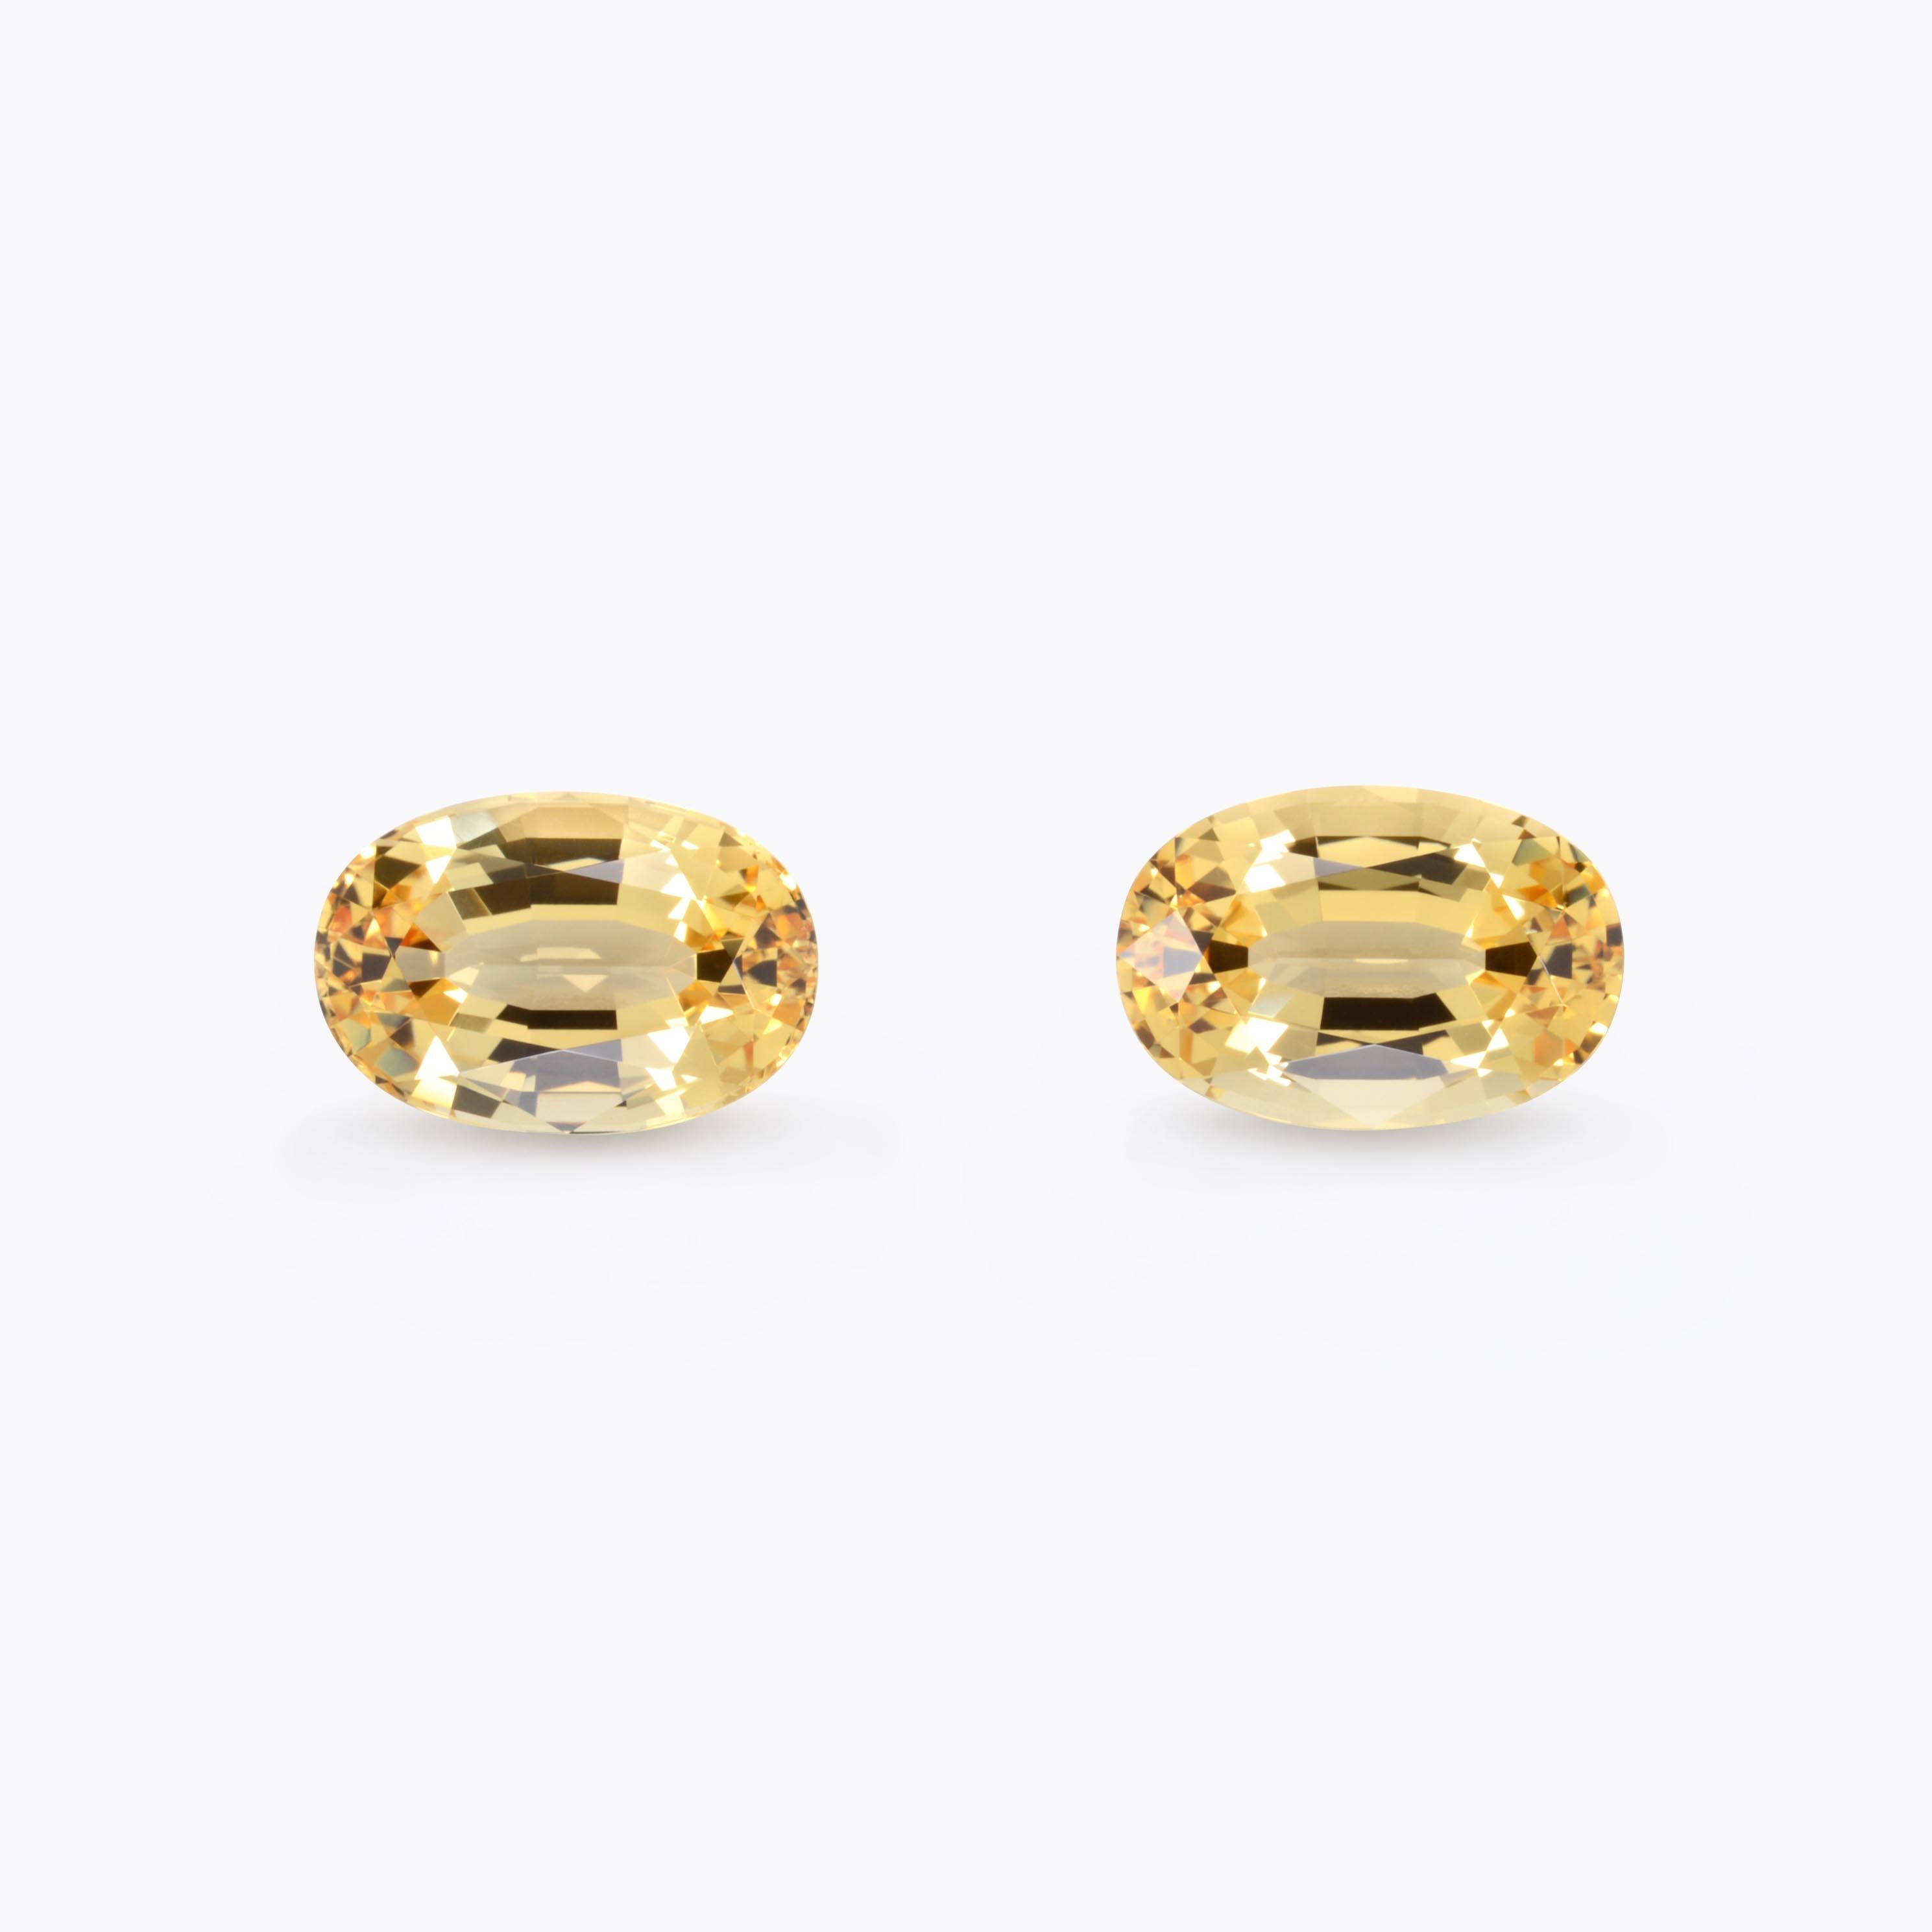 Contemporary Imperial Topaz Earring Gemstones 10.80 Carat Oval Loose Gems For Sale